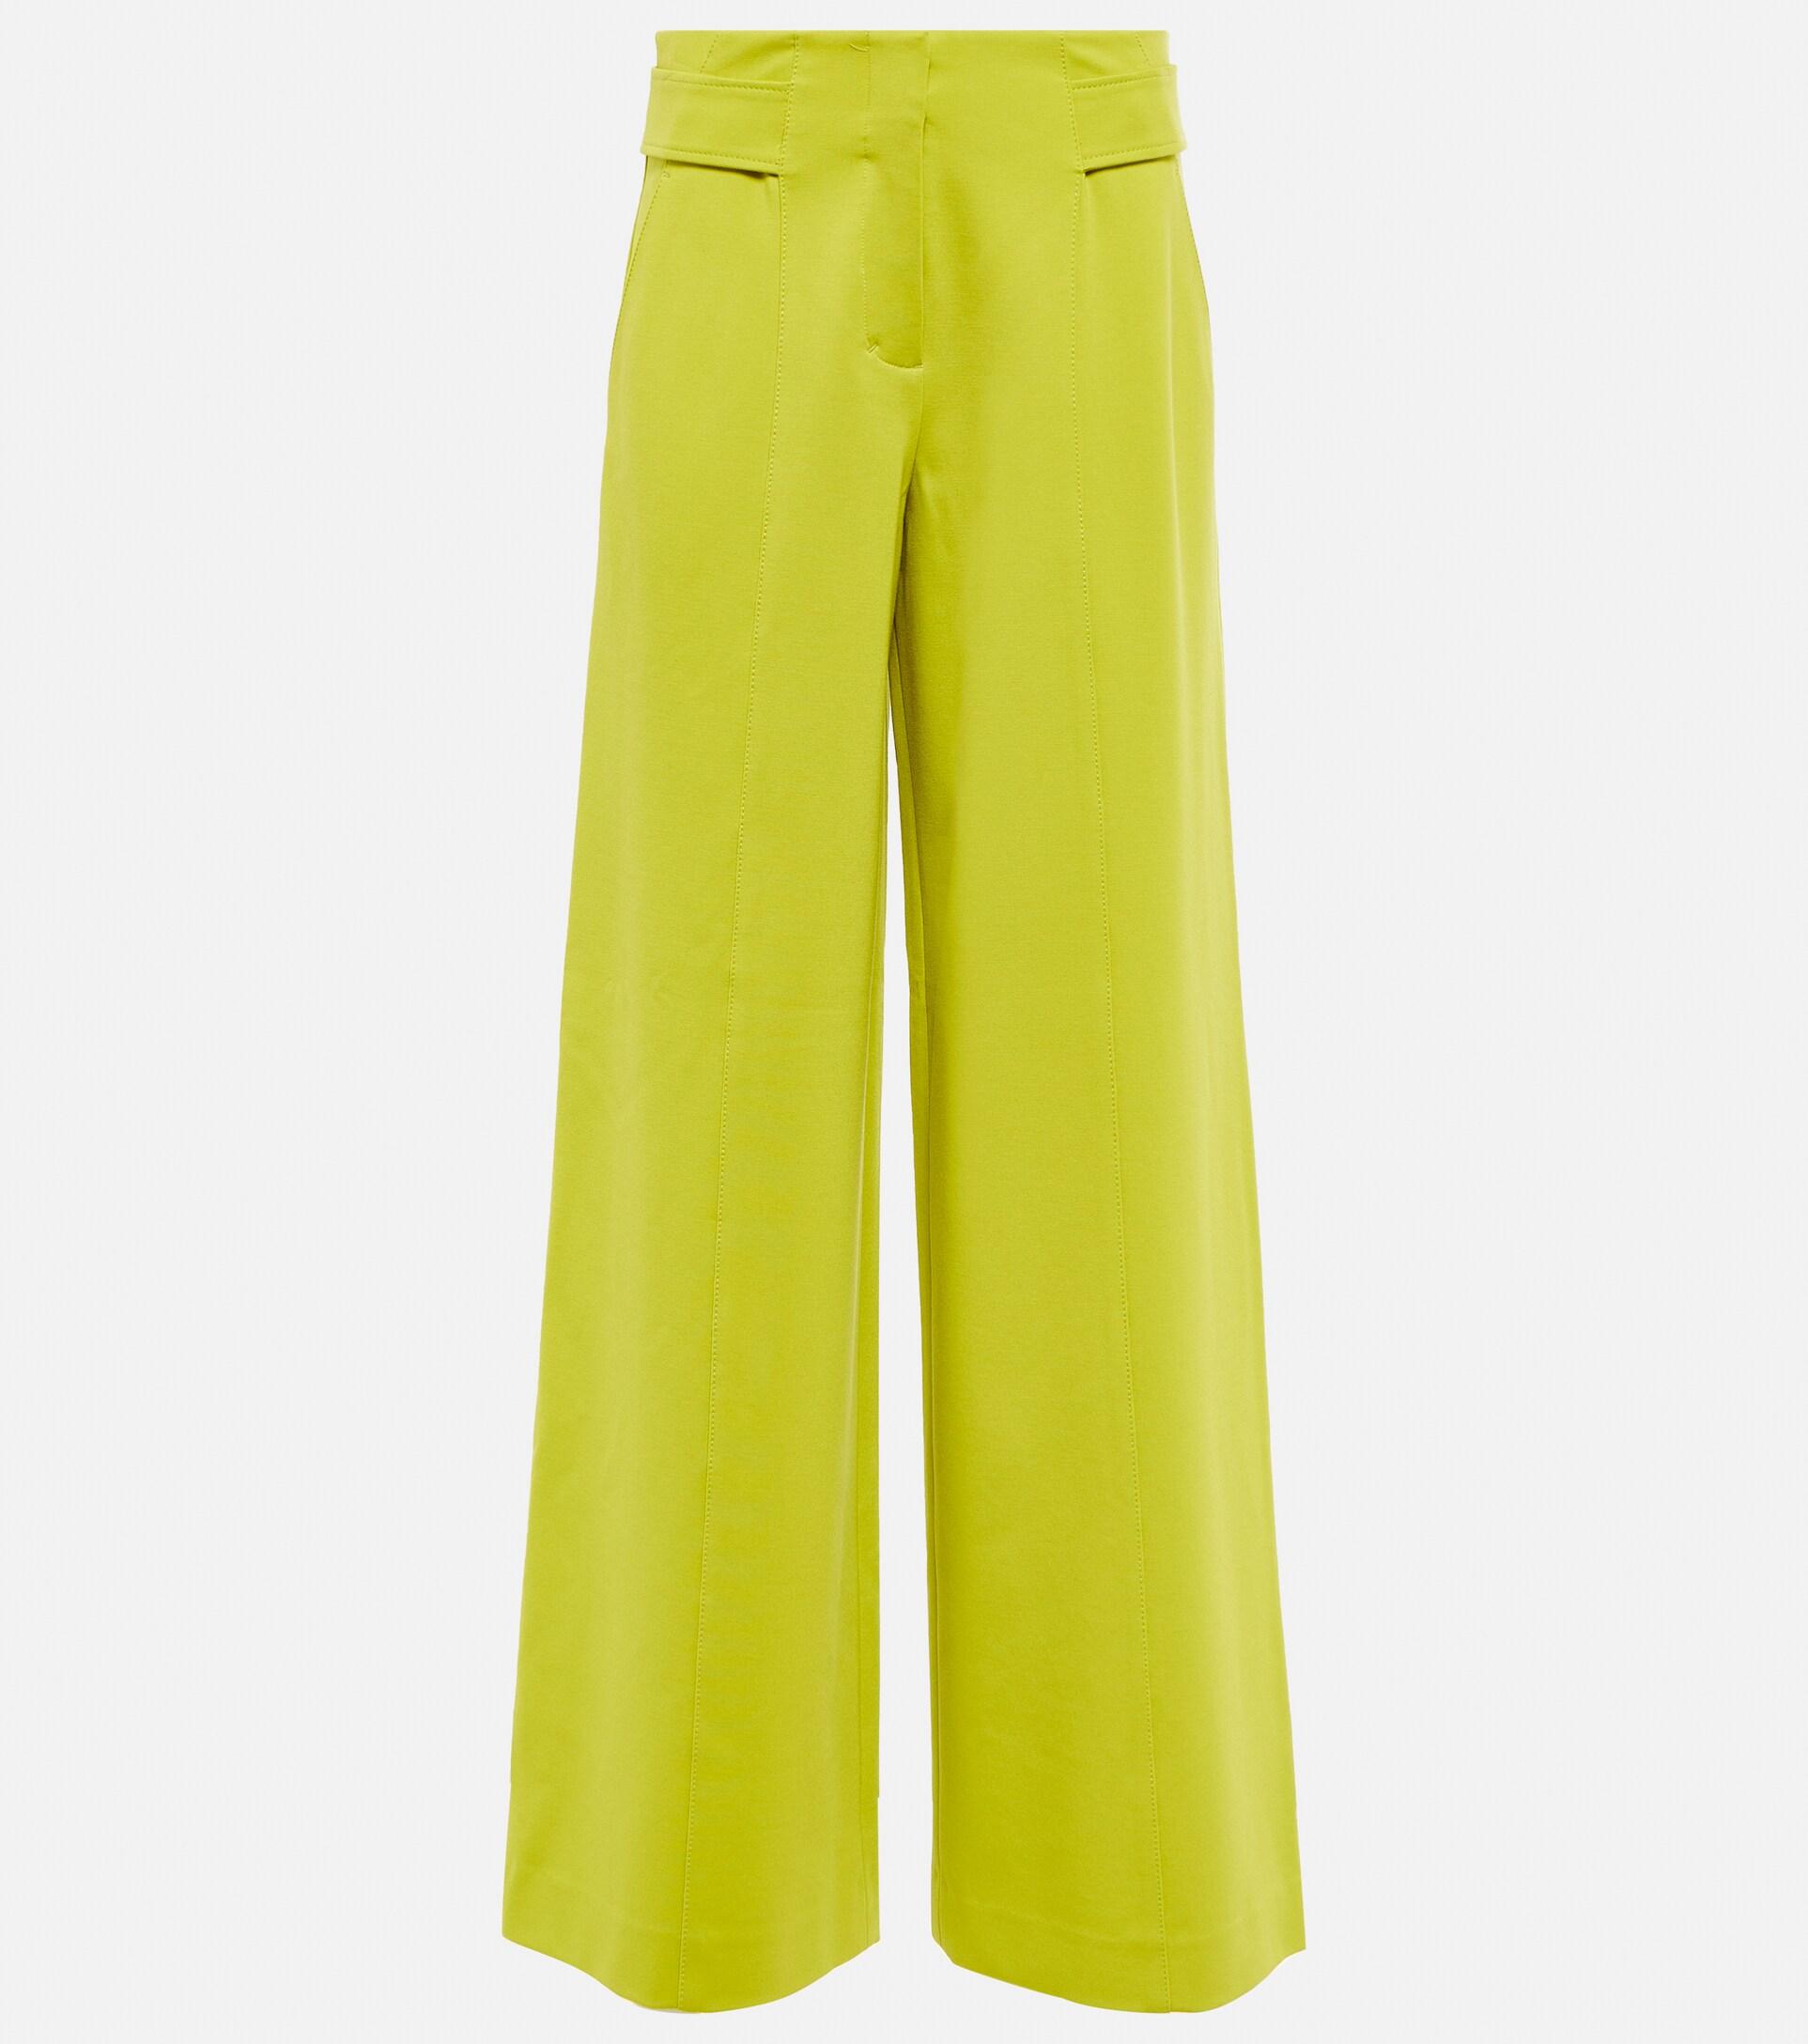 Dorothee Schumacher High-rise Wide-leg Jersey Pants in Yellow | Lyst